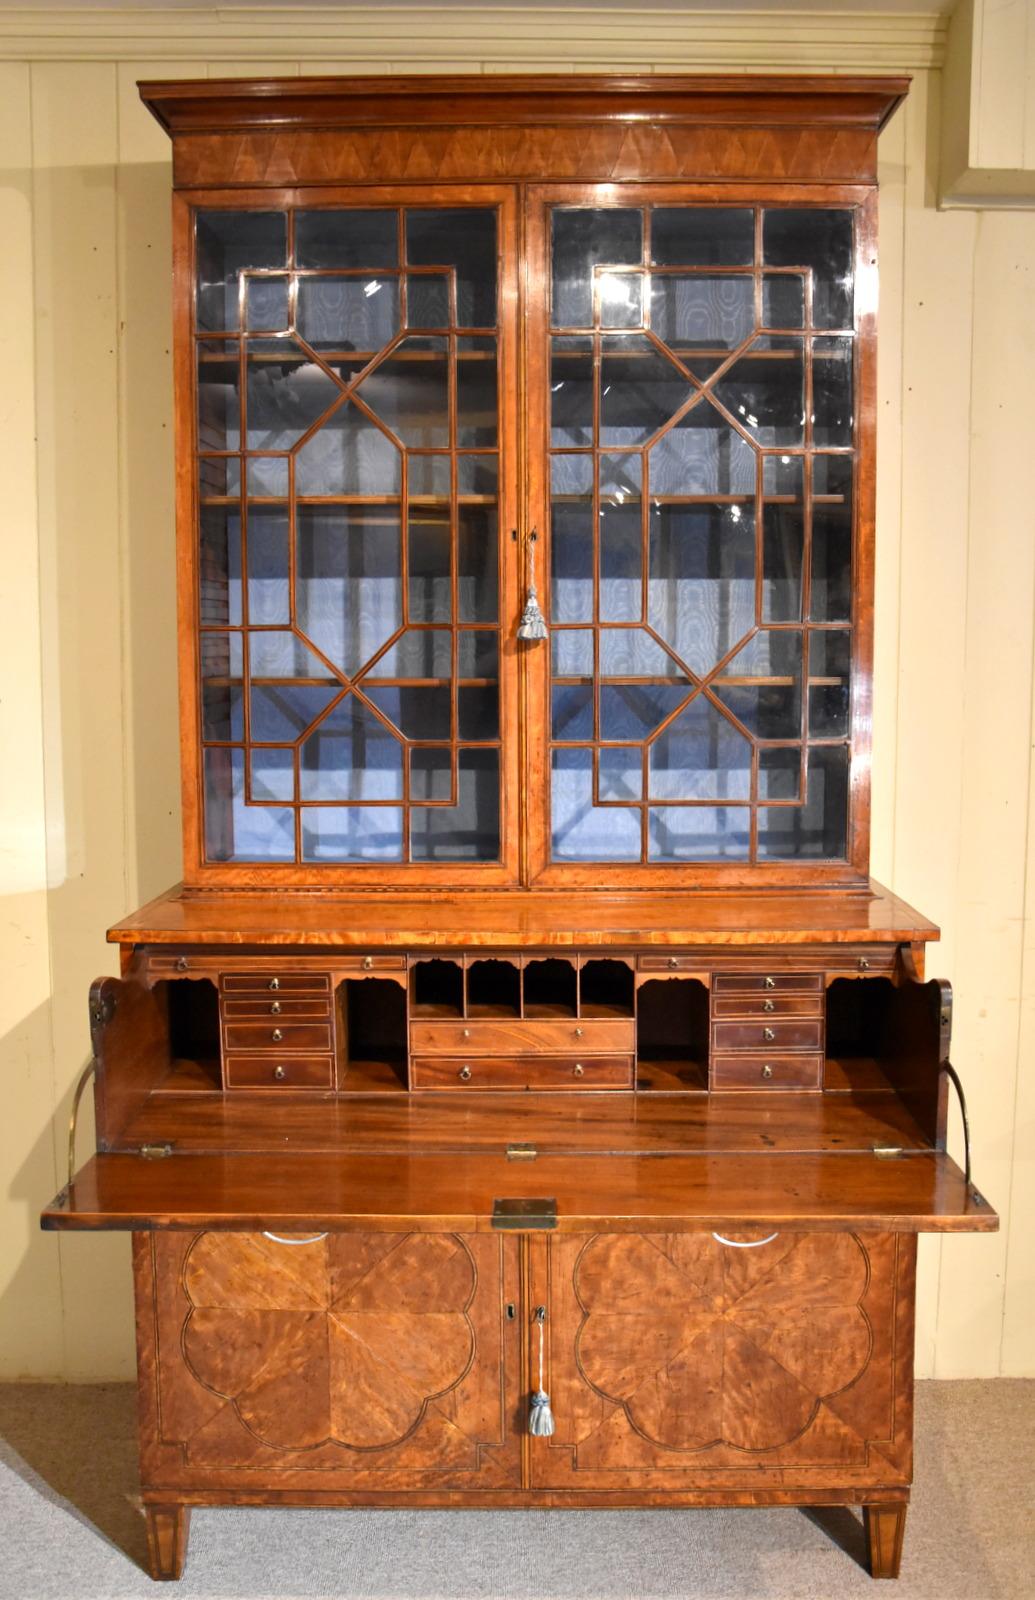 A stunning late 18th century West-Indies satinwood secretaire bookcase, circa 1790.

Dimensions
width 48.75